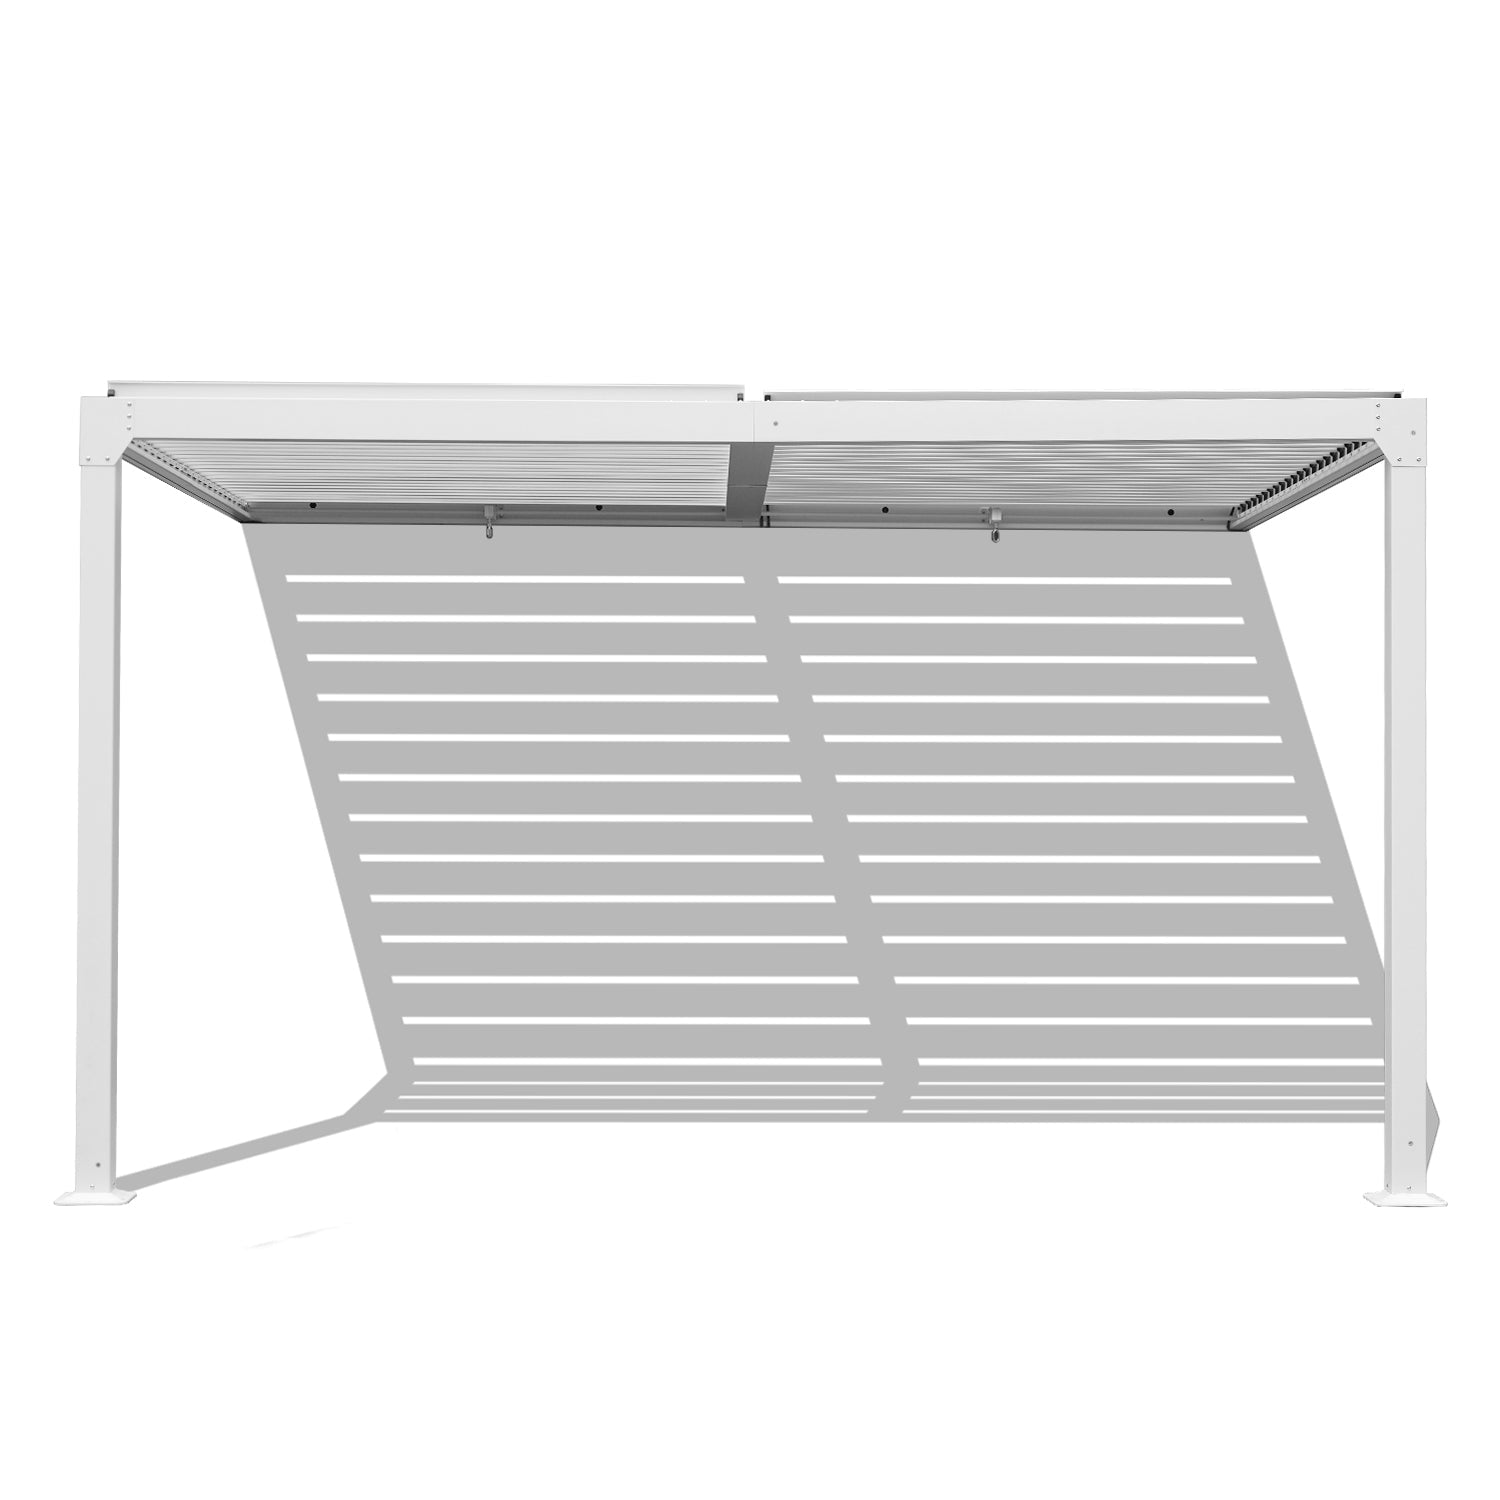 13 x 10 ft. Outdoor Aluminum Wall Mounted Louvered Pergola, Sun Shade Shelter with 2 Adjustable Panels  - Dark Gray/White Louvered Pergola Aoodor LLC White  